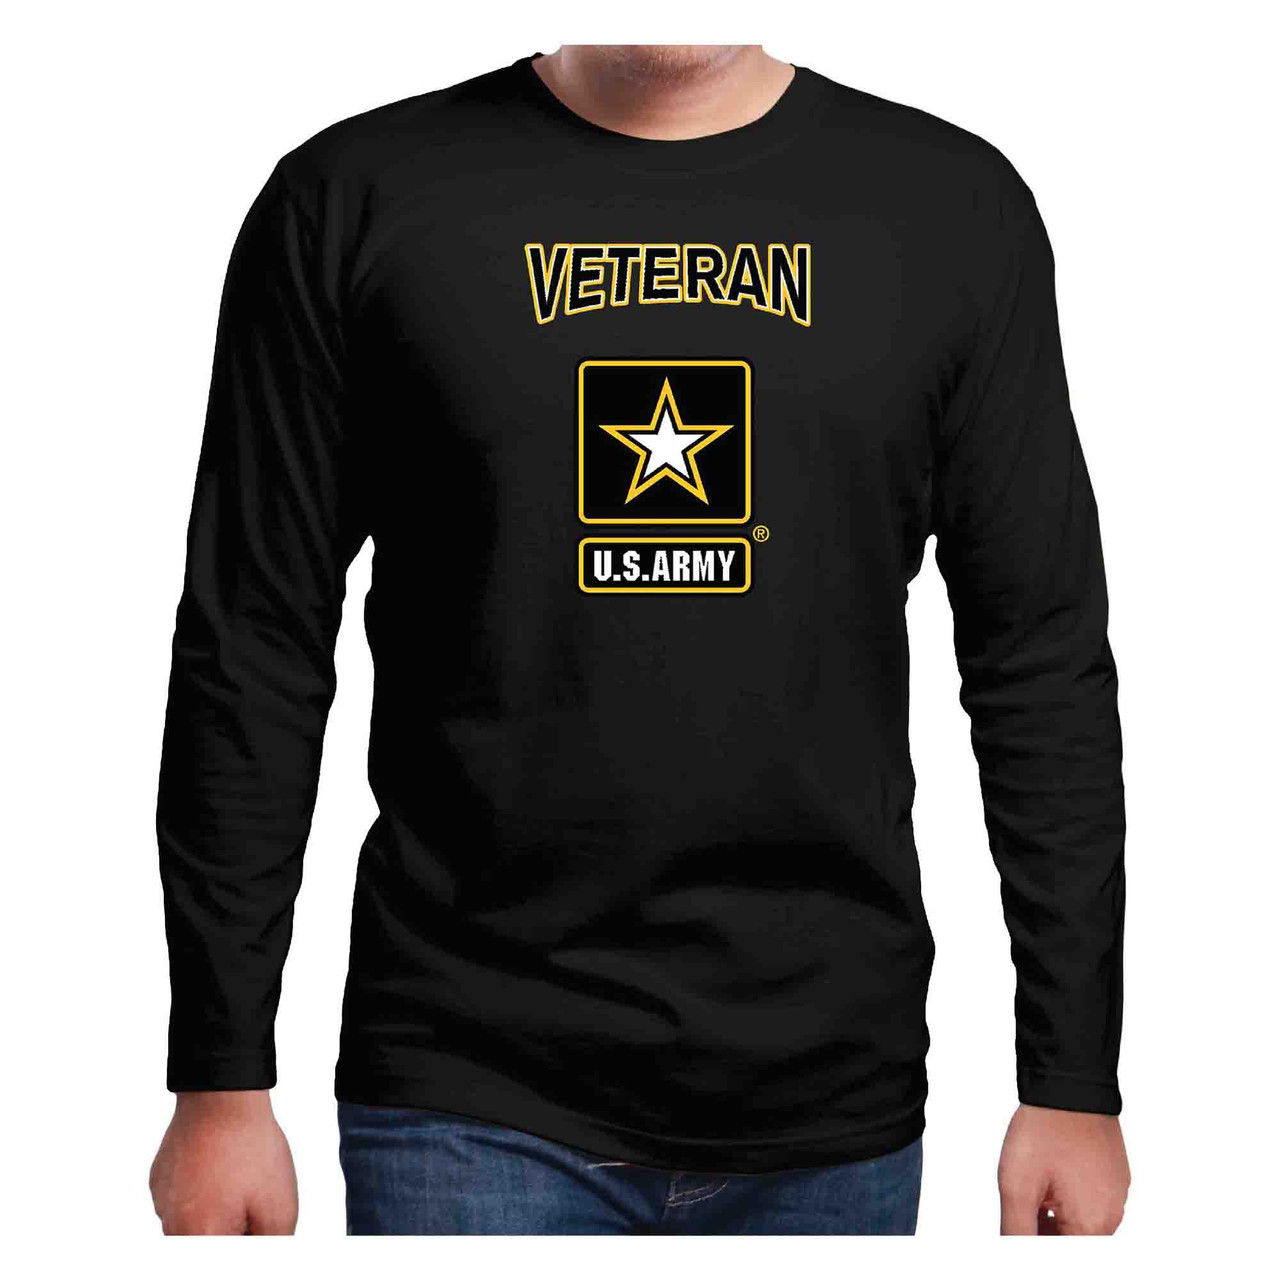 The Officially Licensed U.S. Army Veteran with Star Logo Performance Black Long Sleeve Shirt - front view